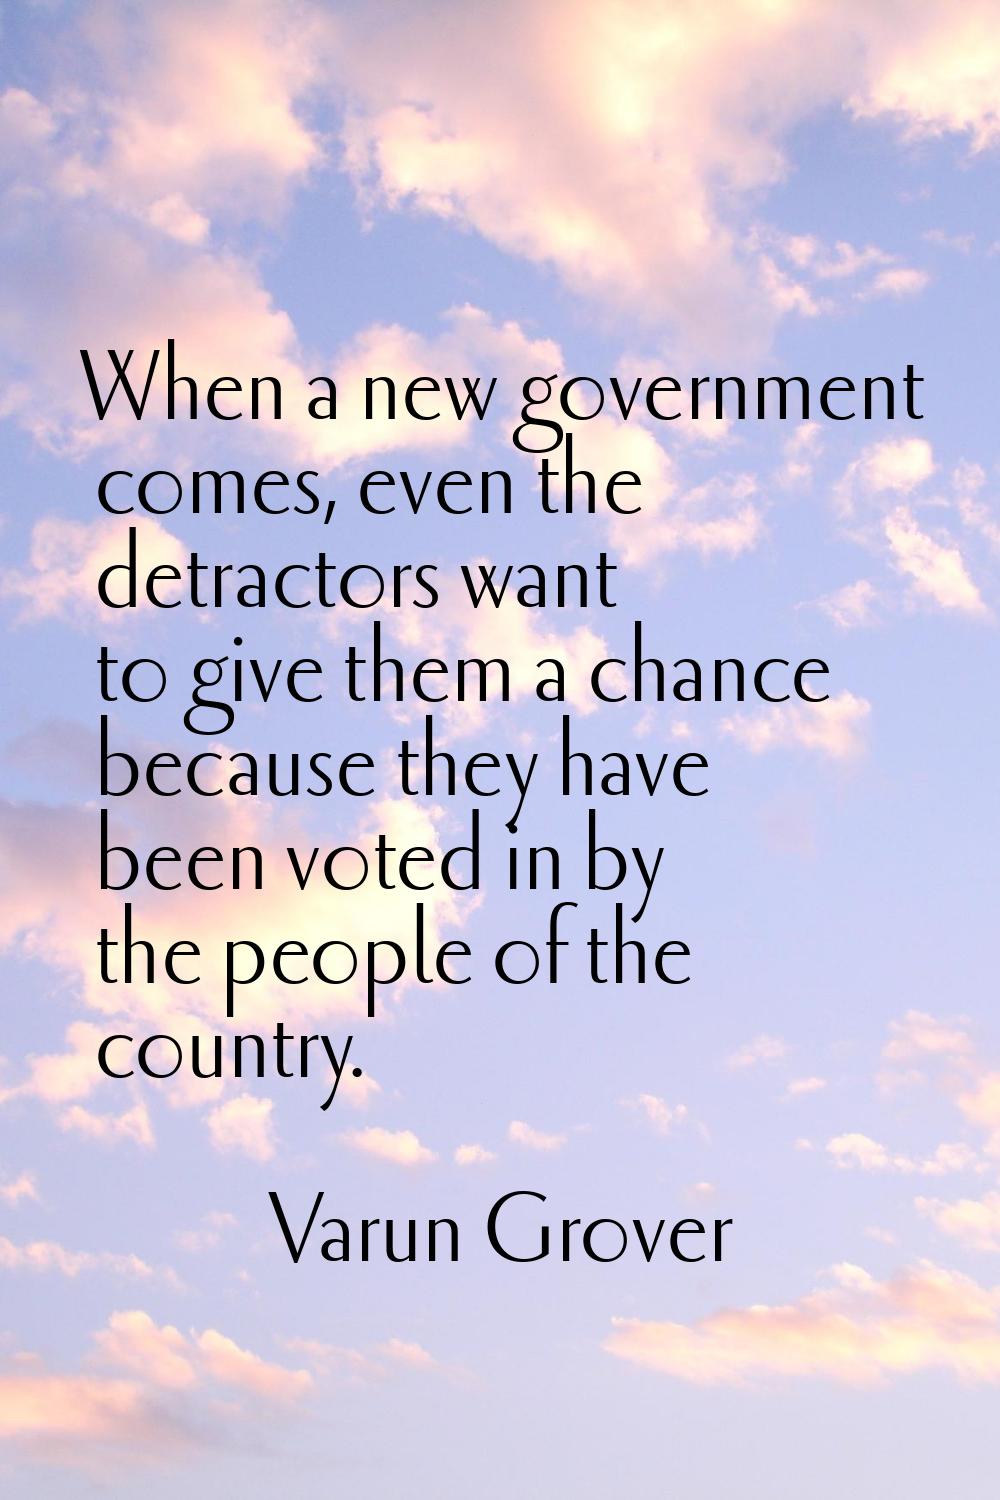 When a new government comes, even the detractors want to give them a chance because they have been 